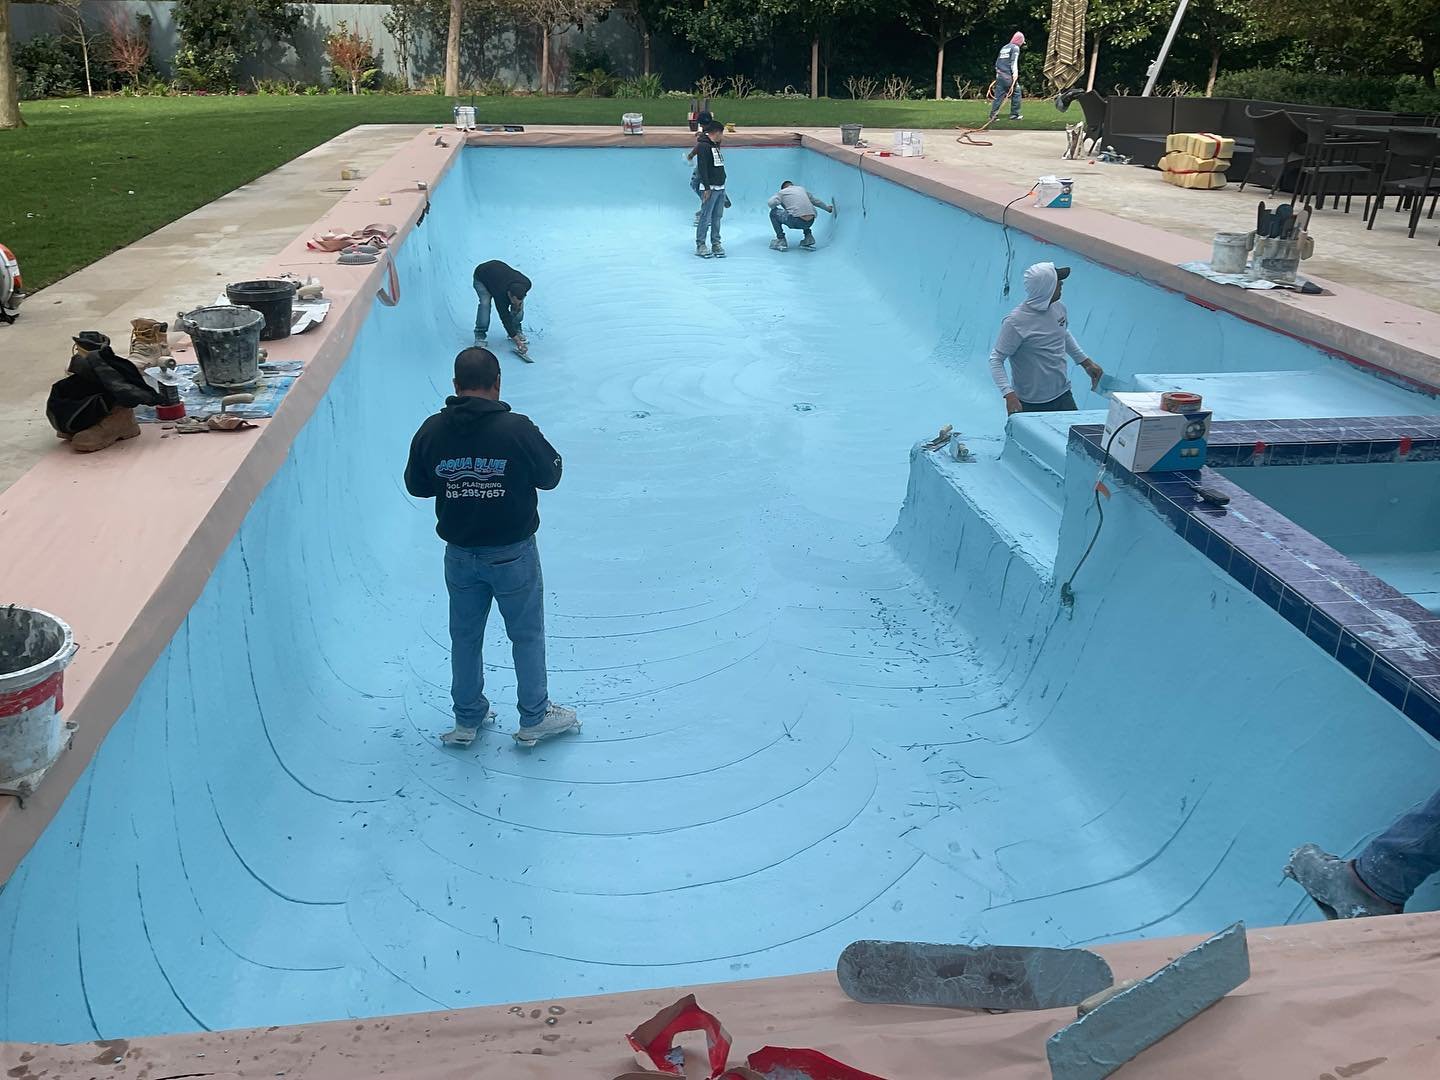 New Project 💦

📍San Jose, California 

📲CALL OUR OFFICE AT 408-295-7657

We can also be reached @ 408-202-2131 for New Pool Projects &amp; Remodels.

📩 PLEASE EMAIL US: aquablueswimmingpools1@gmail.com